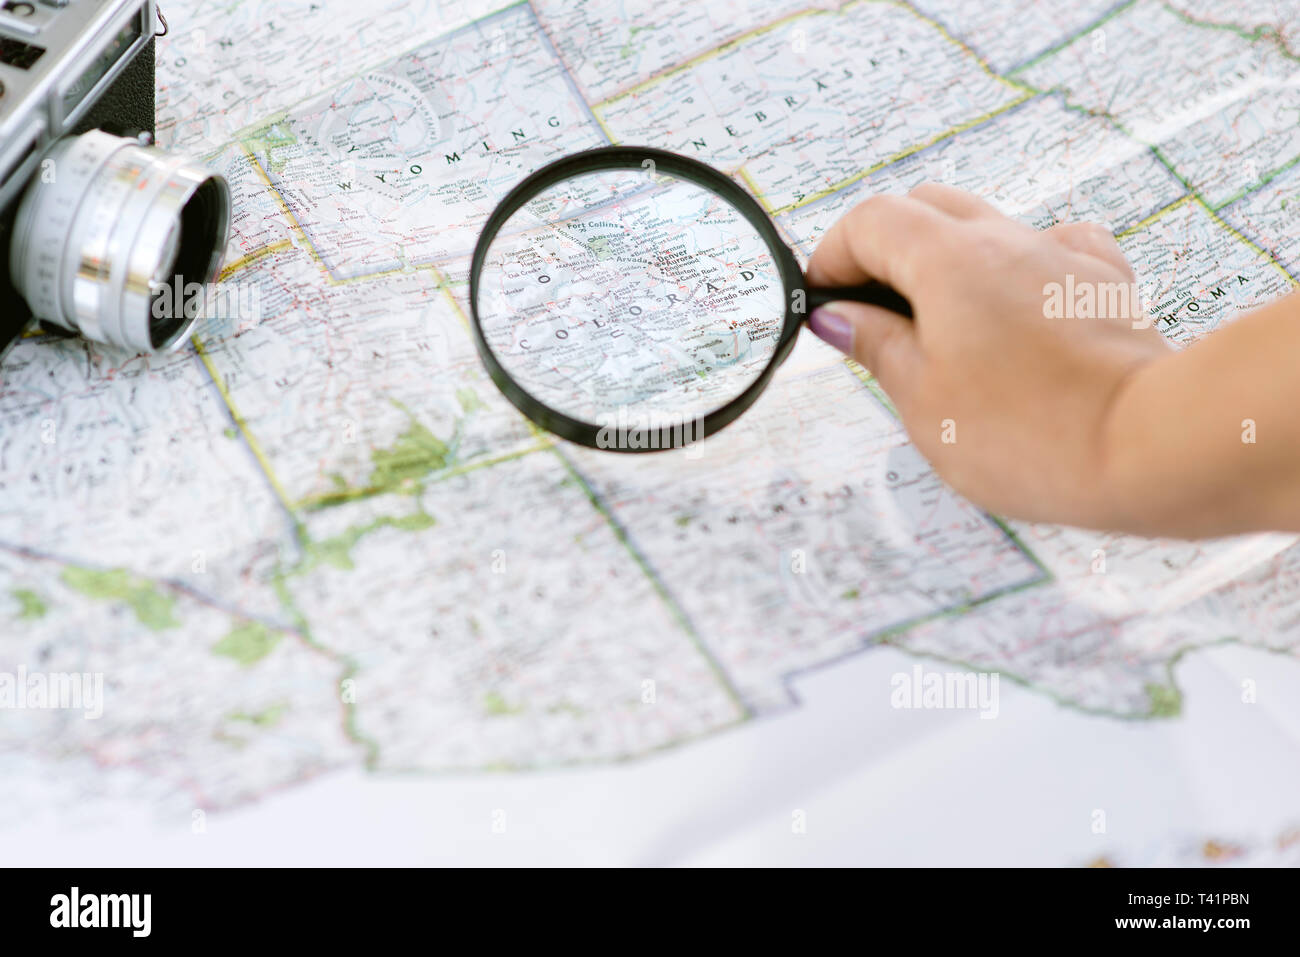 The hand of a woman points her magnifying glass at a map to plan her travels Stock Photo